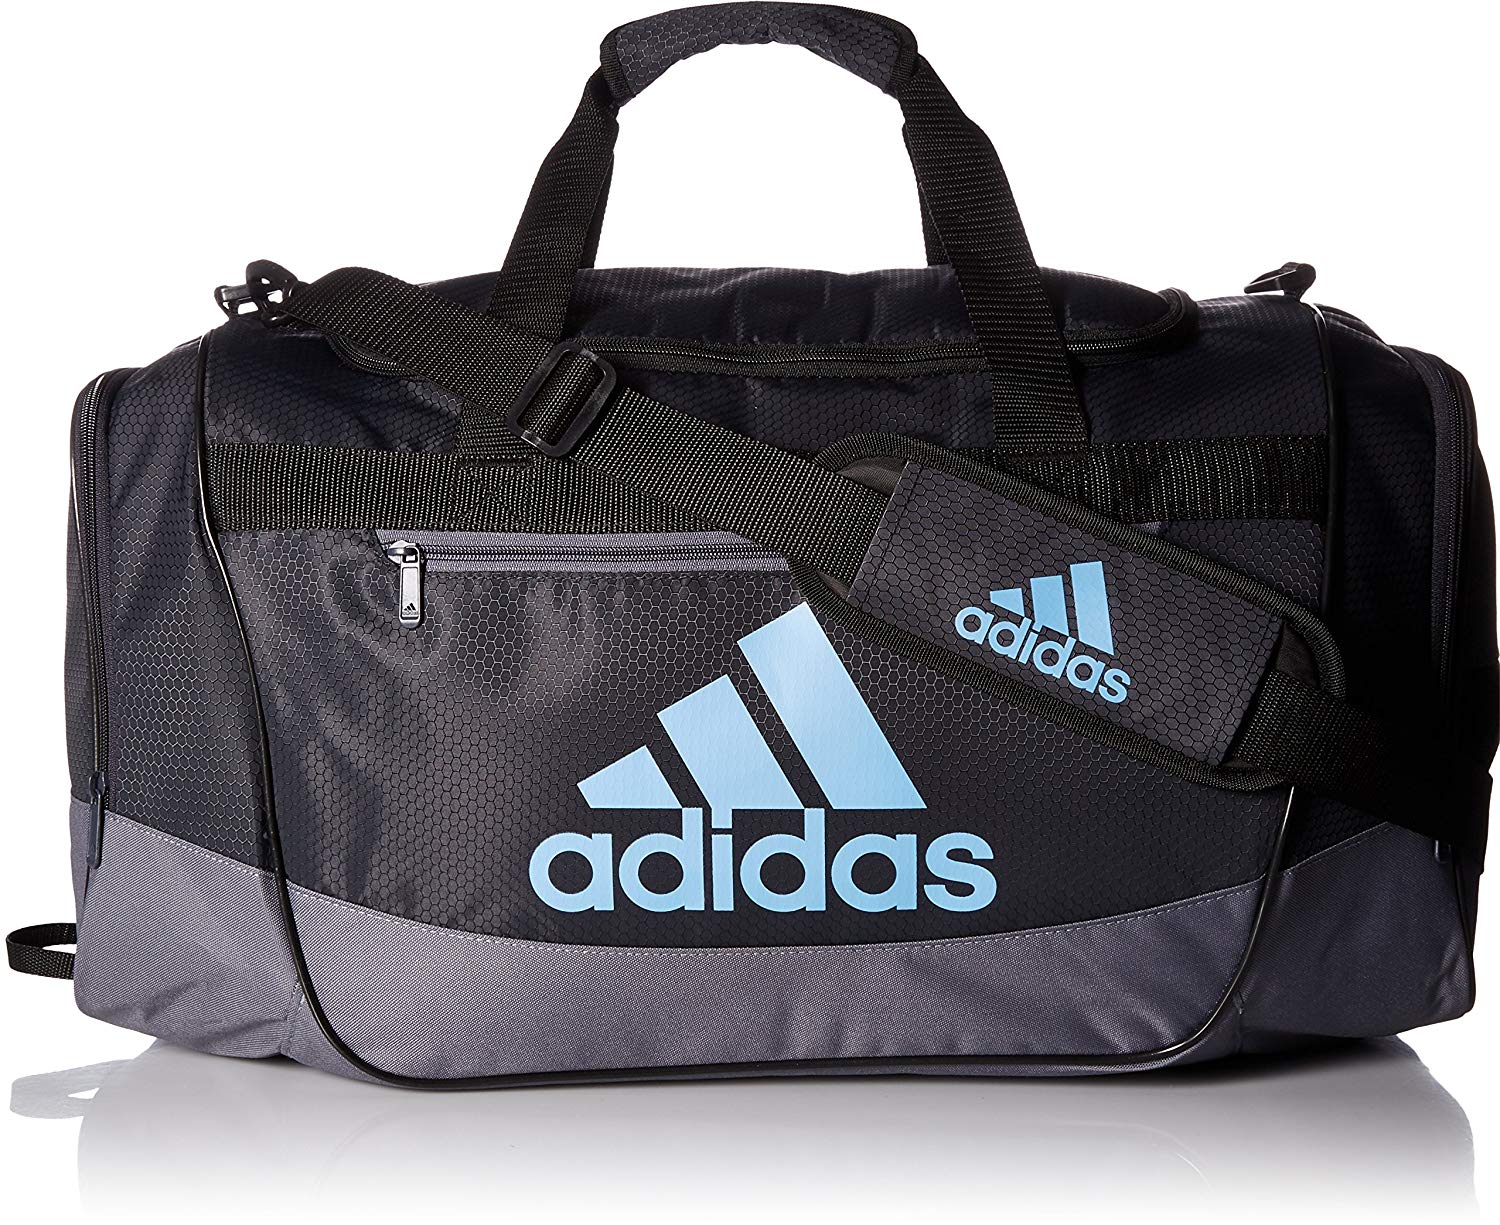  Adidas - Soccer Bags With Pockets